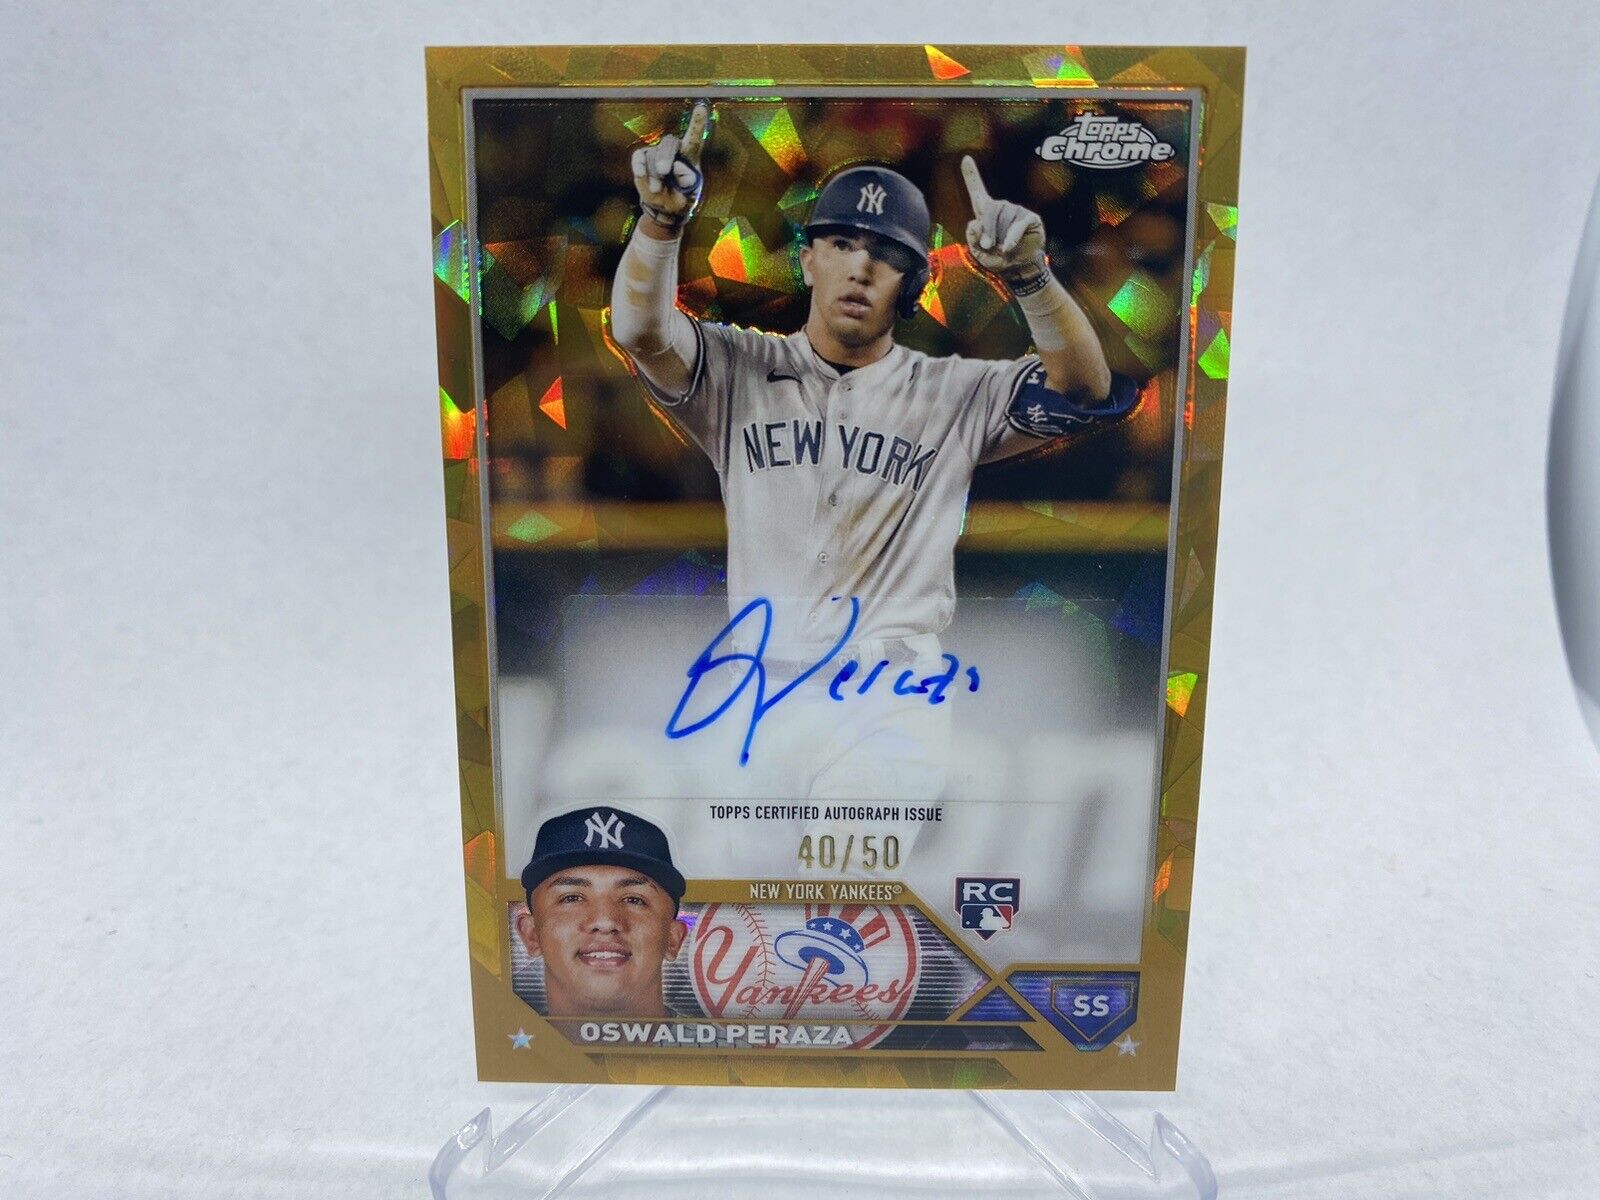 2023 Topps Chrome Update Sapphire Oswald Peraza Yankees RC Gold Auto SP /50